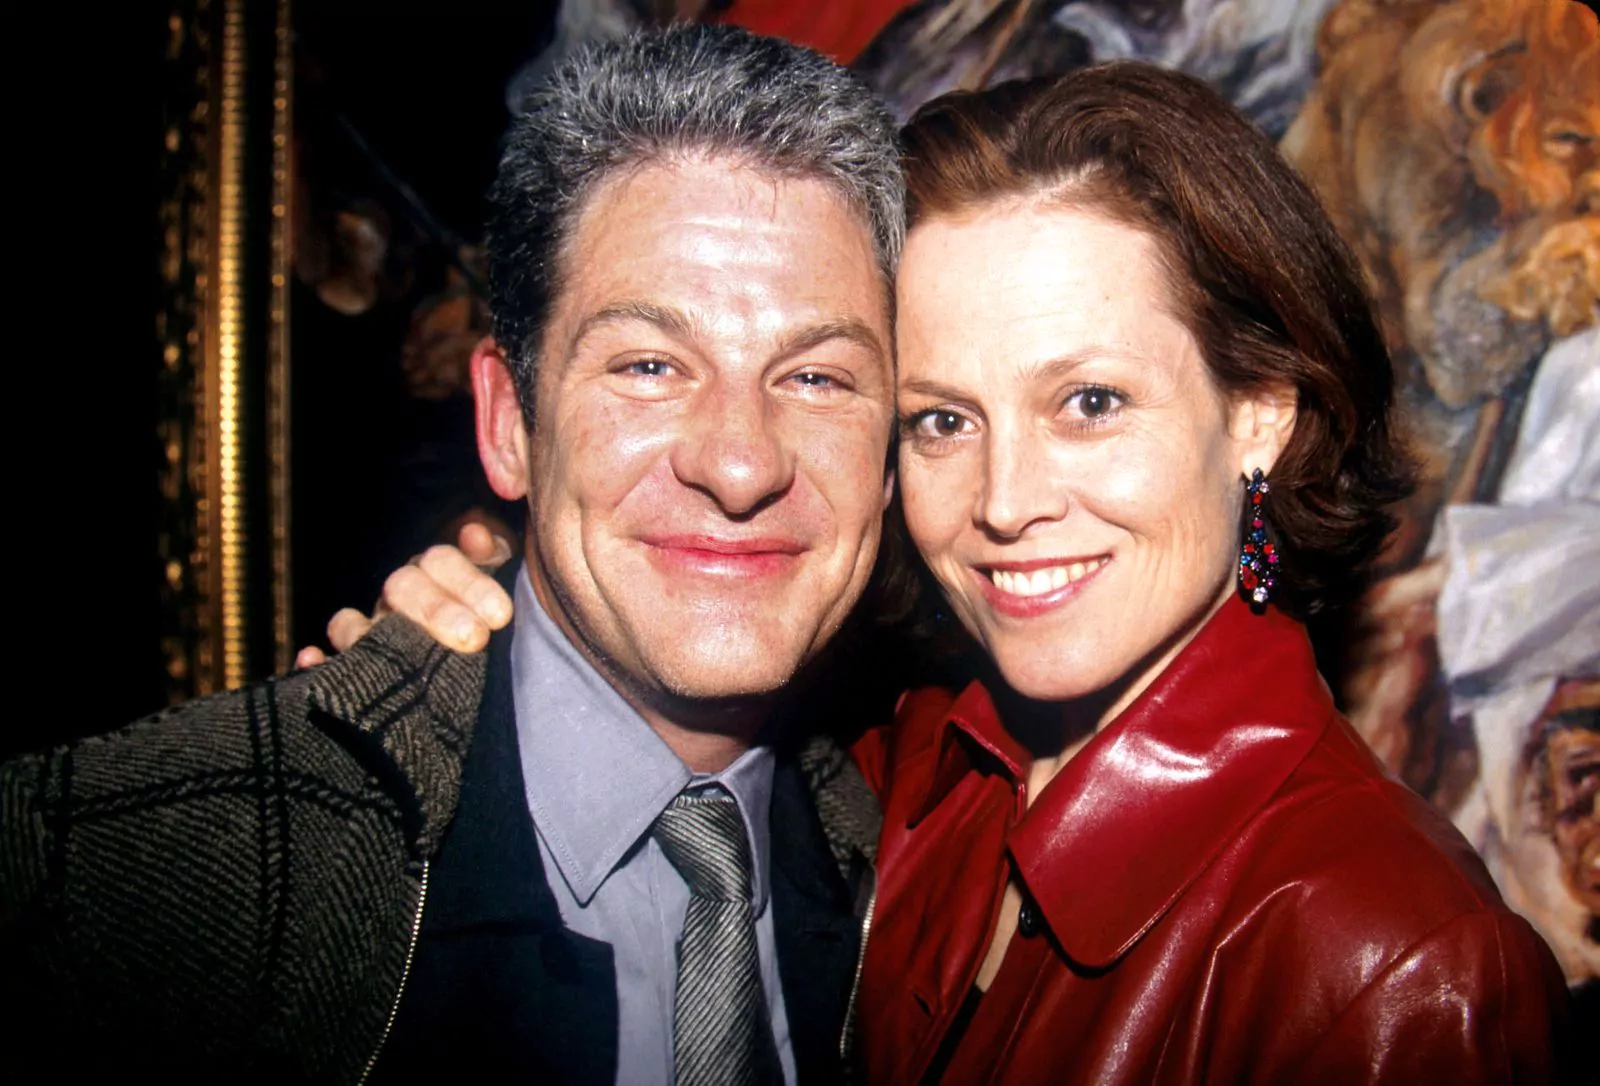 Sigourney Weaver with her husband Jim Simpson at a party in New York, October 14, 1999